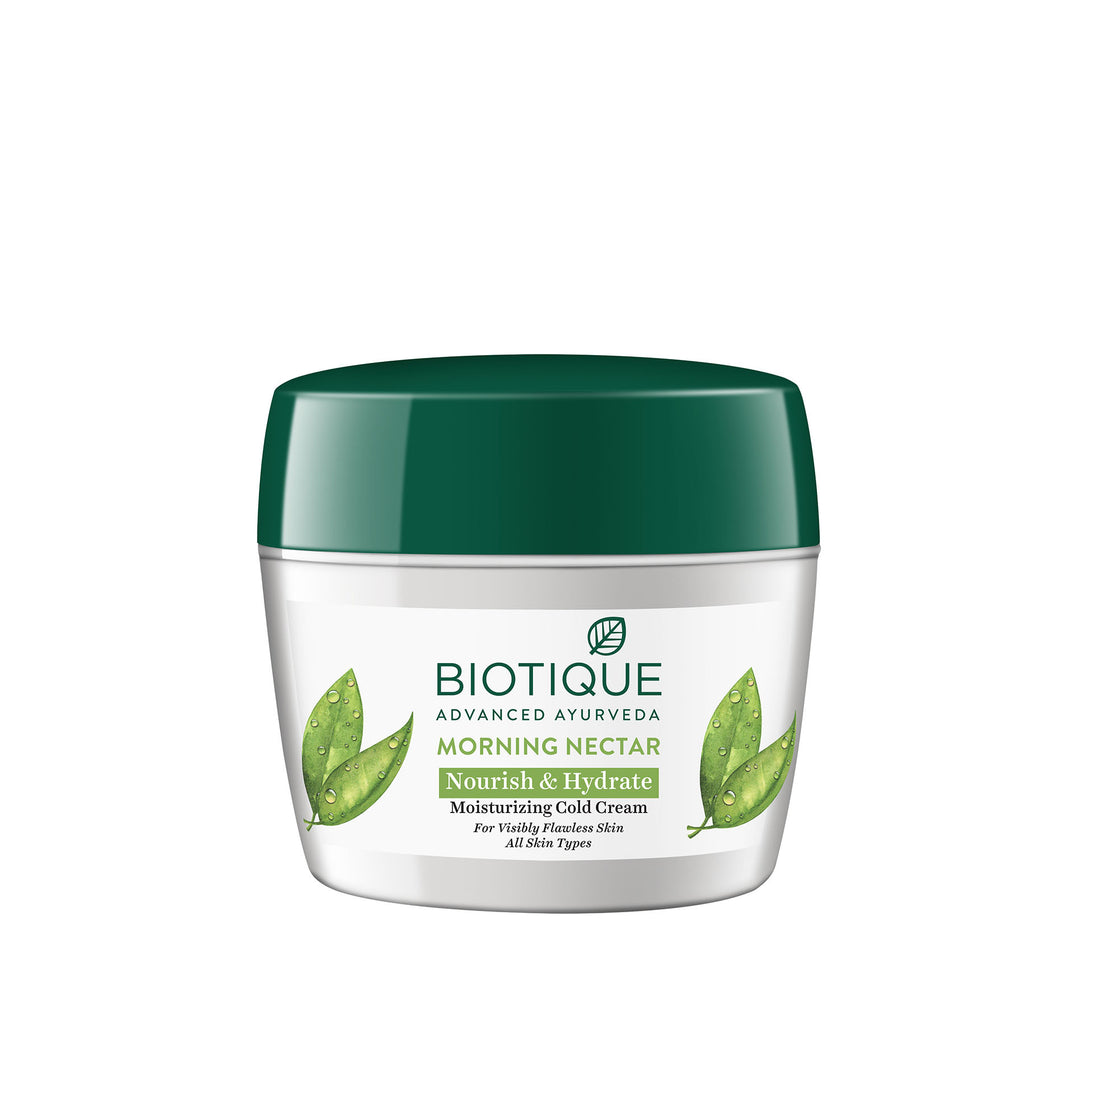 Biotique Morning Nectar Visibly Flawless Nourish & Hydrate Moisturizing Cold Cream (175Gm)